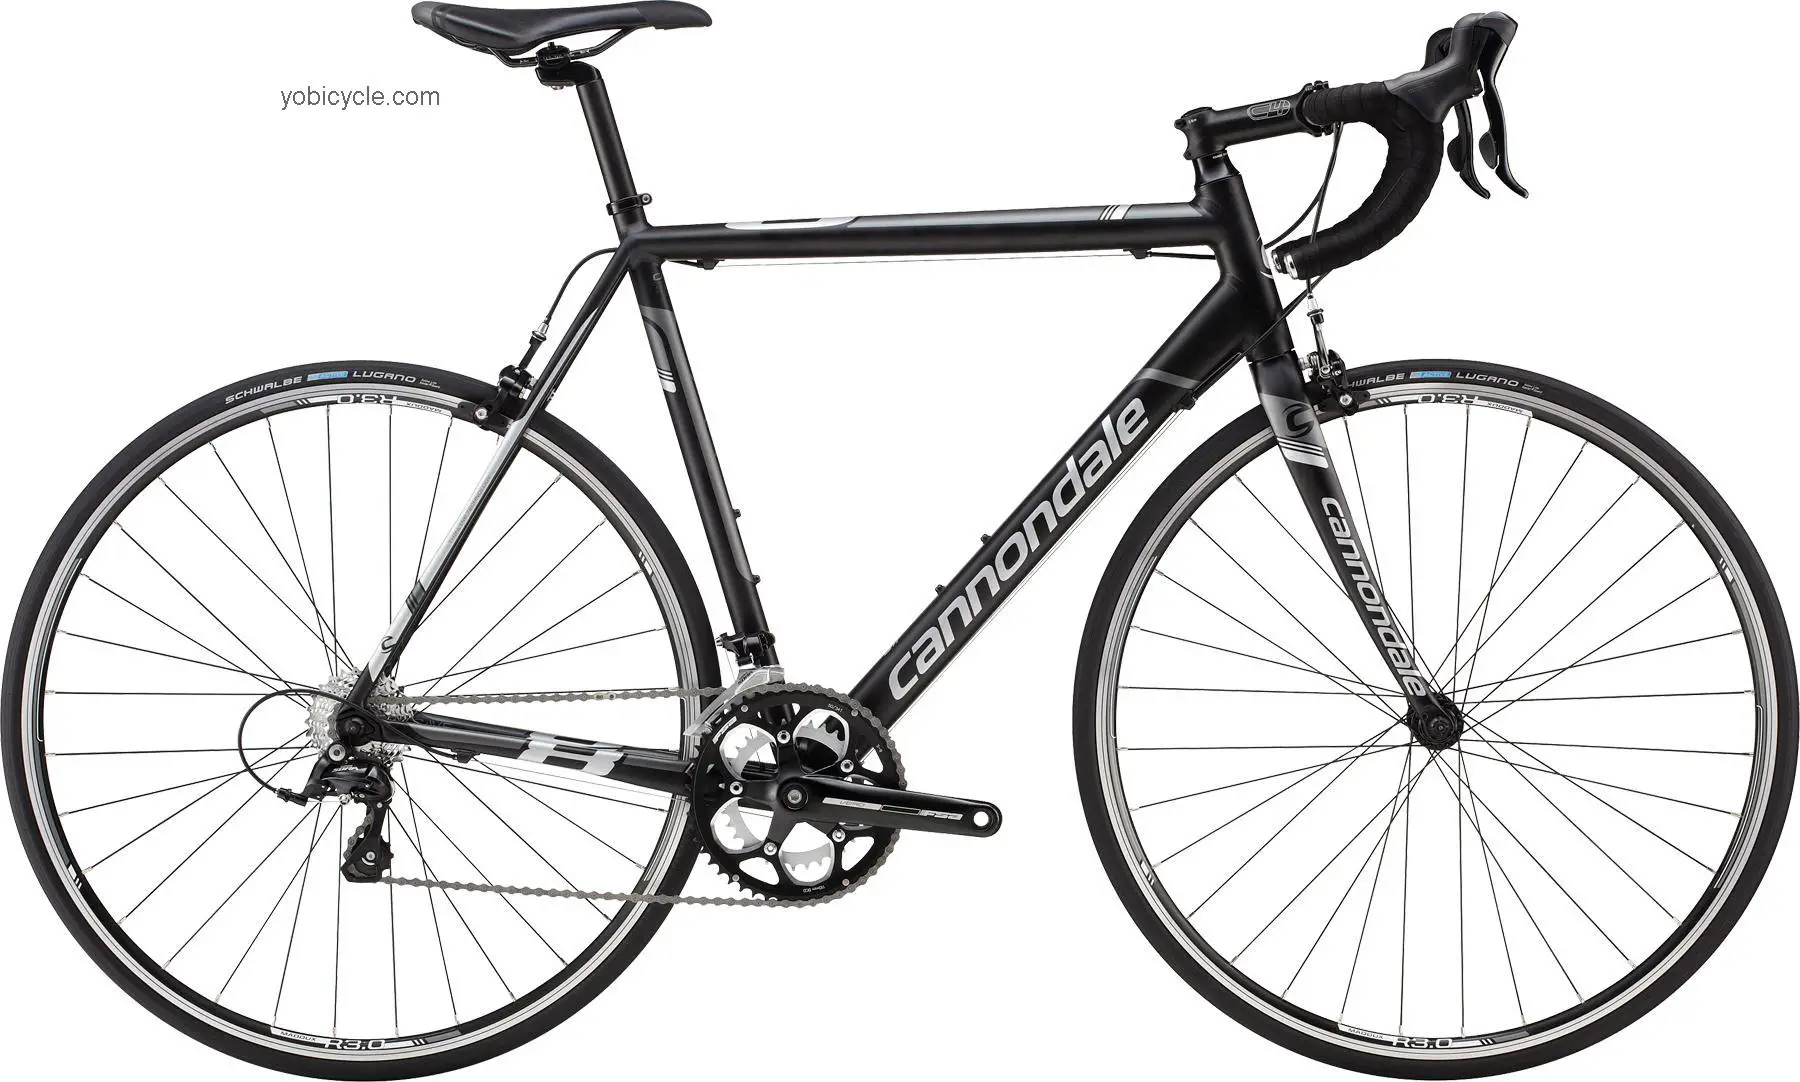 Cannondale CAAD8 7 Sora Compact 2014 comparison online with competitors